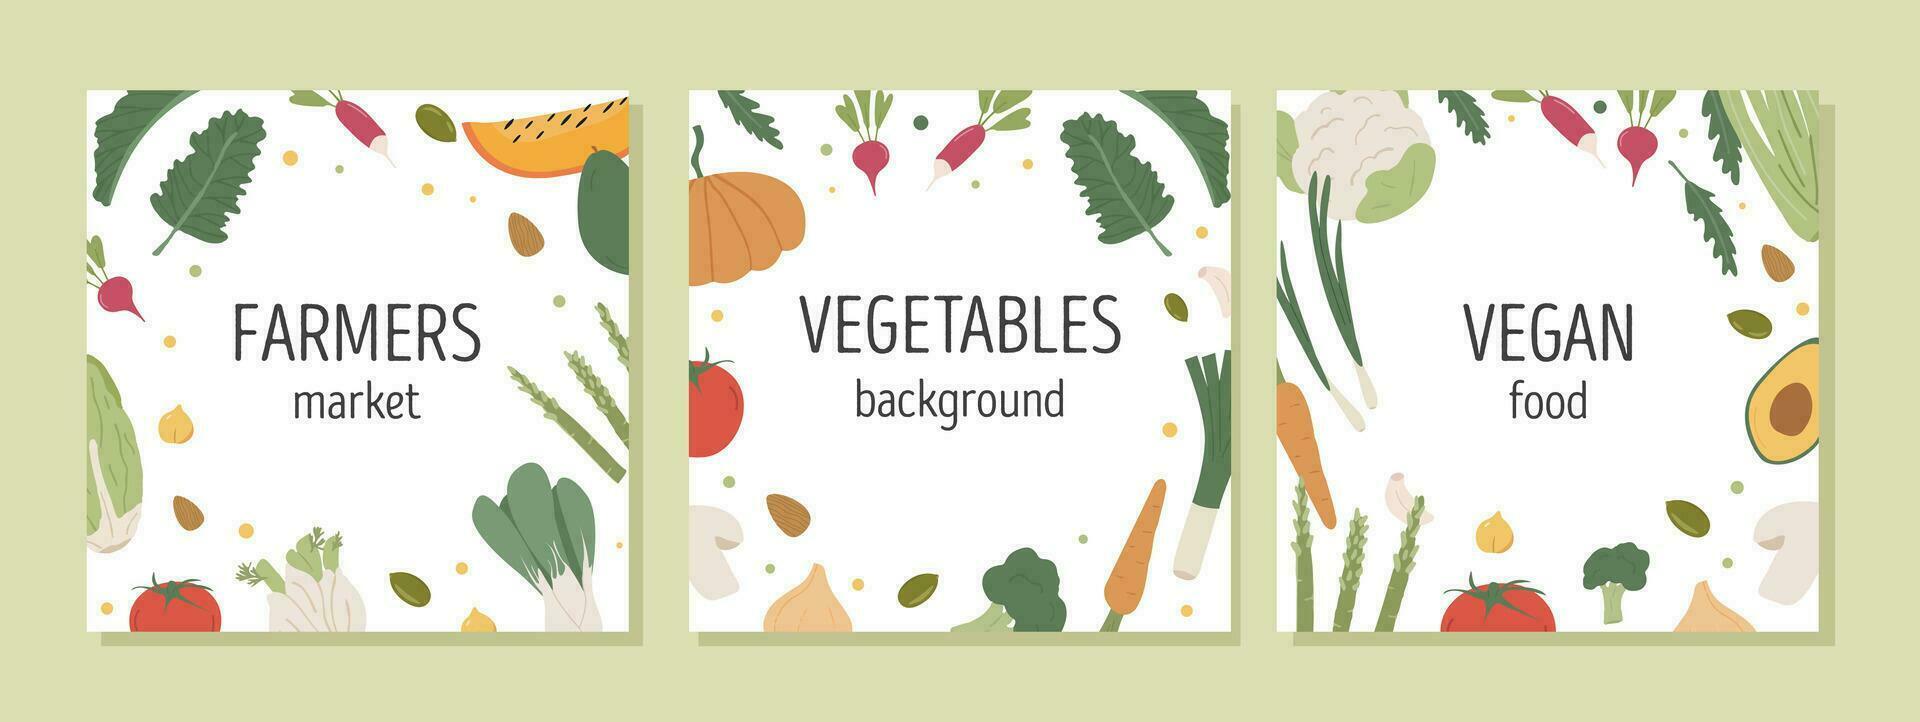 Healthy food frame with background for text. Square card design with fresh vitamin vegetables. Minimalist border with healthy organic veggies. Cover template with groceries. Flat vector illustration.